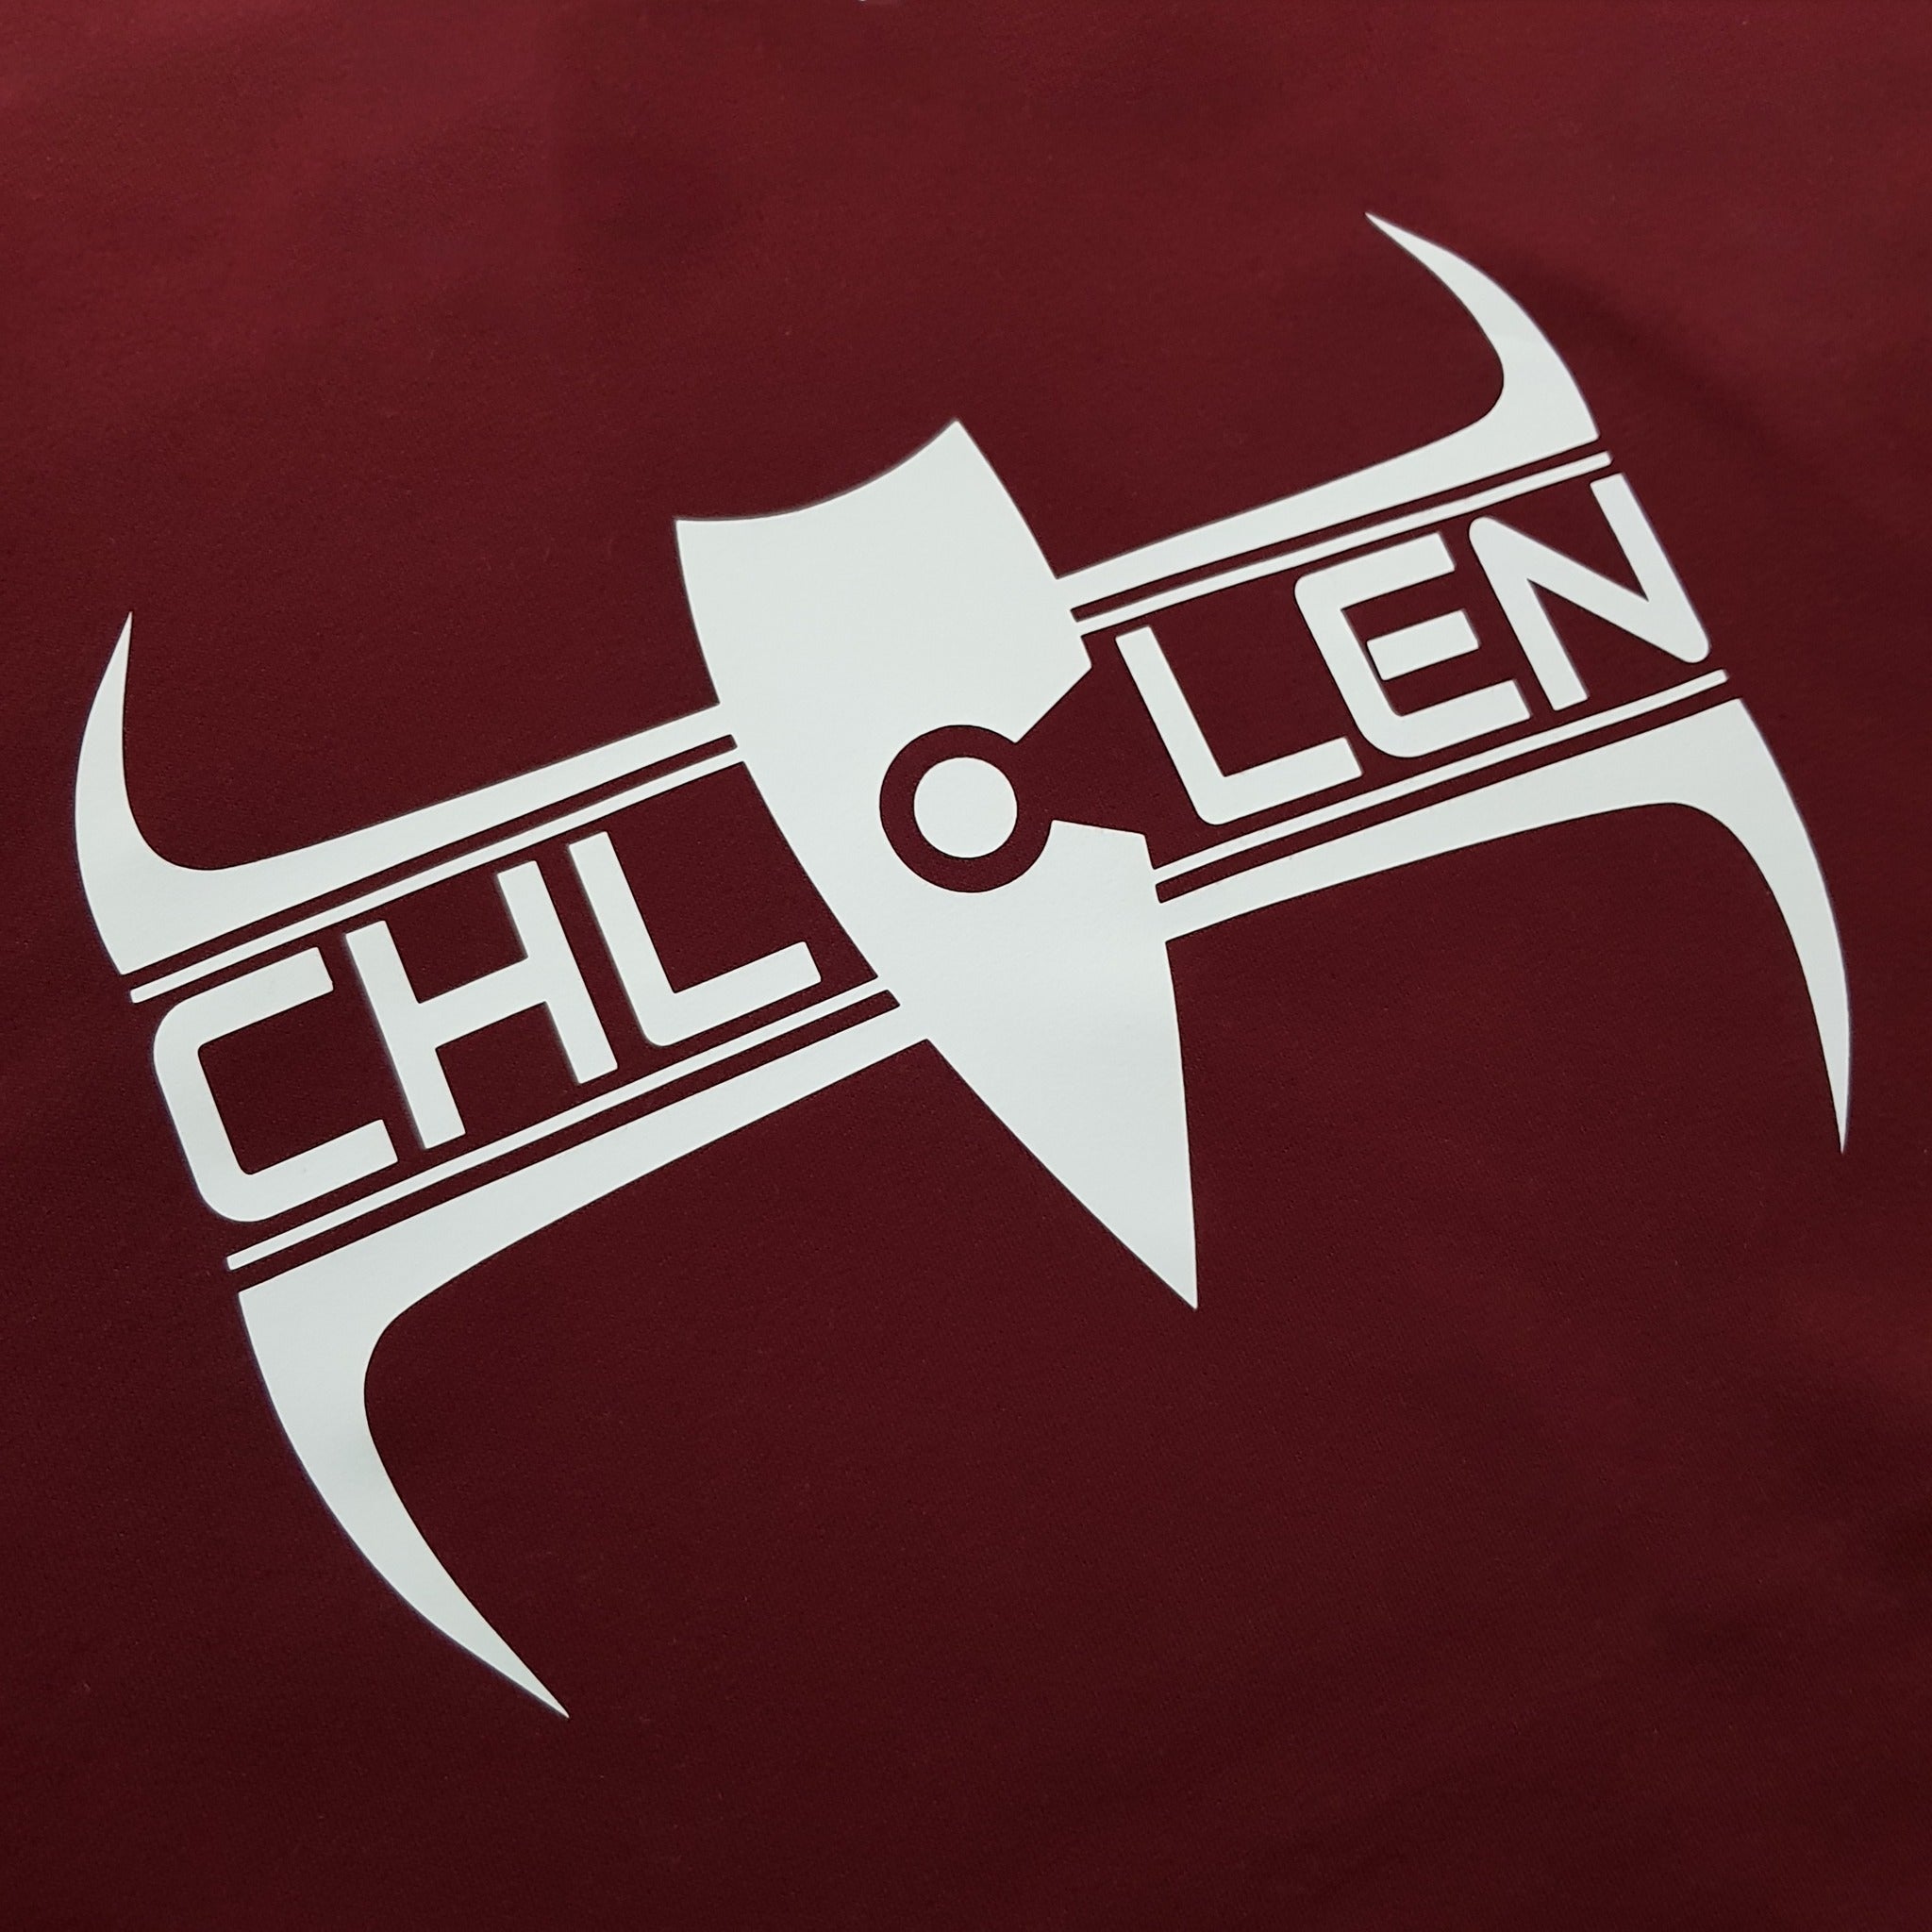 CHLLEN | Lifestyle Your | Lifestyle Wear Chill